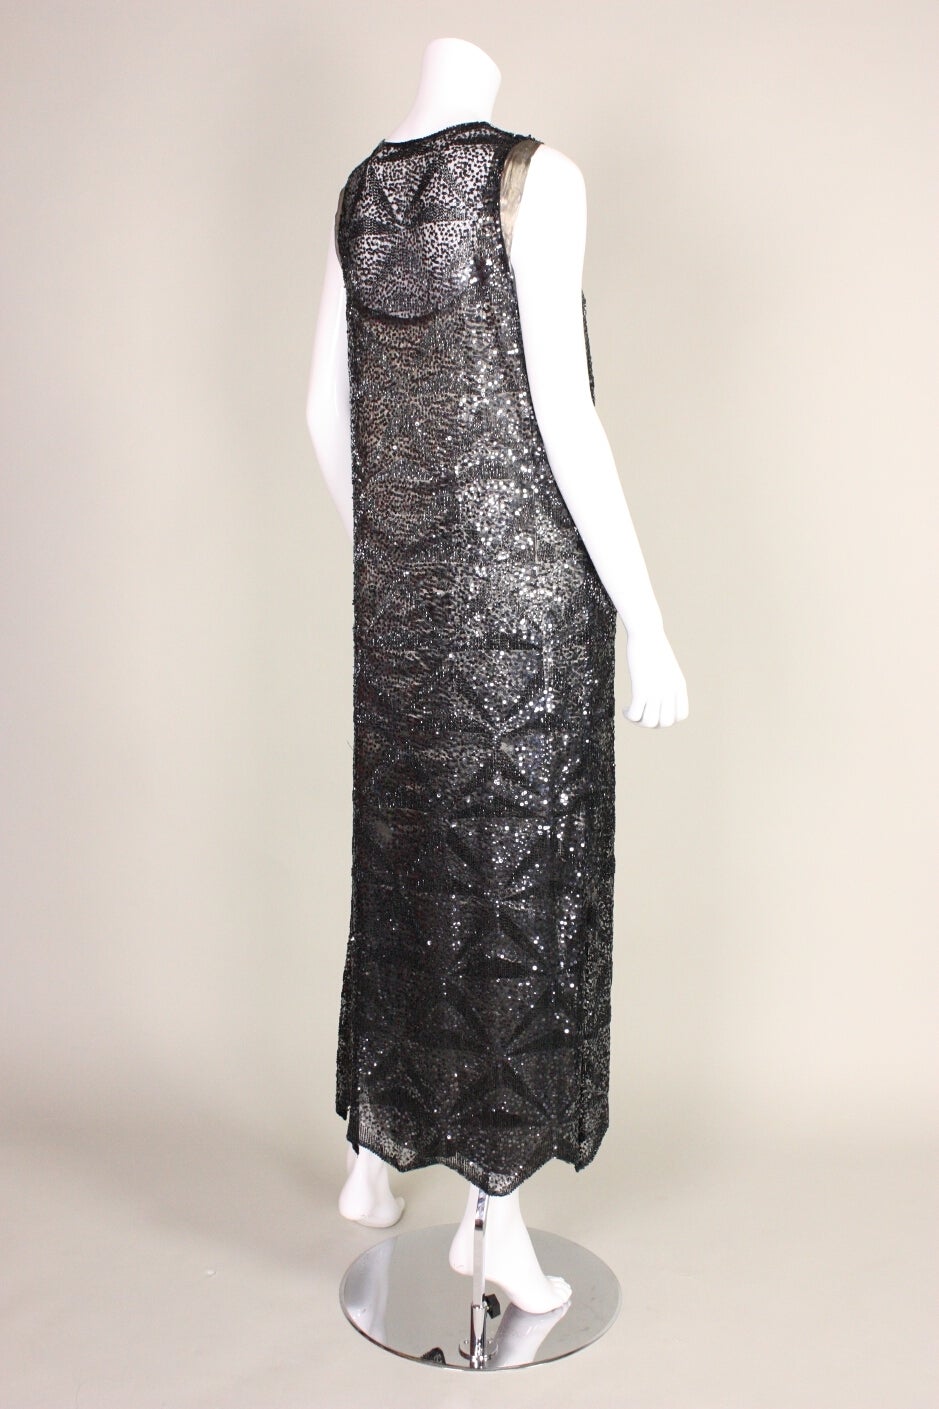 Women's 1920's Sequined & Beaded Dress with Lamé Slip